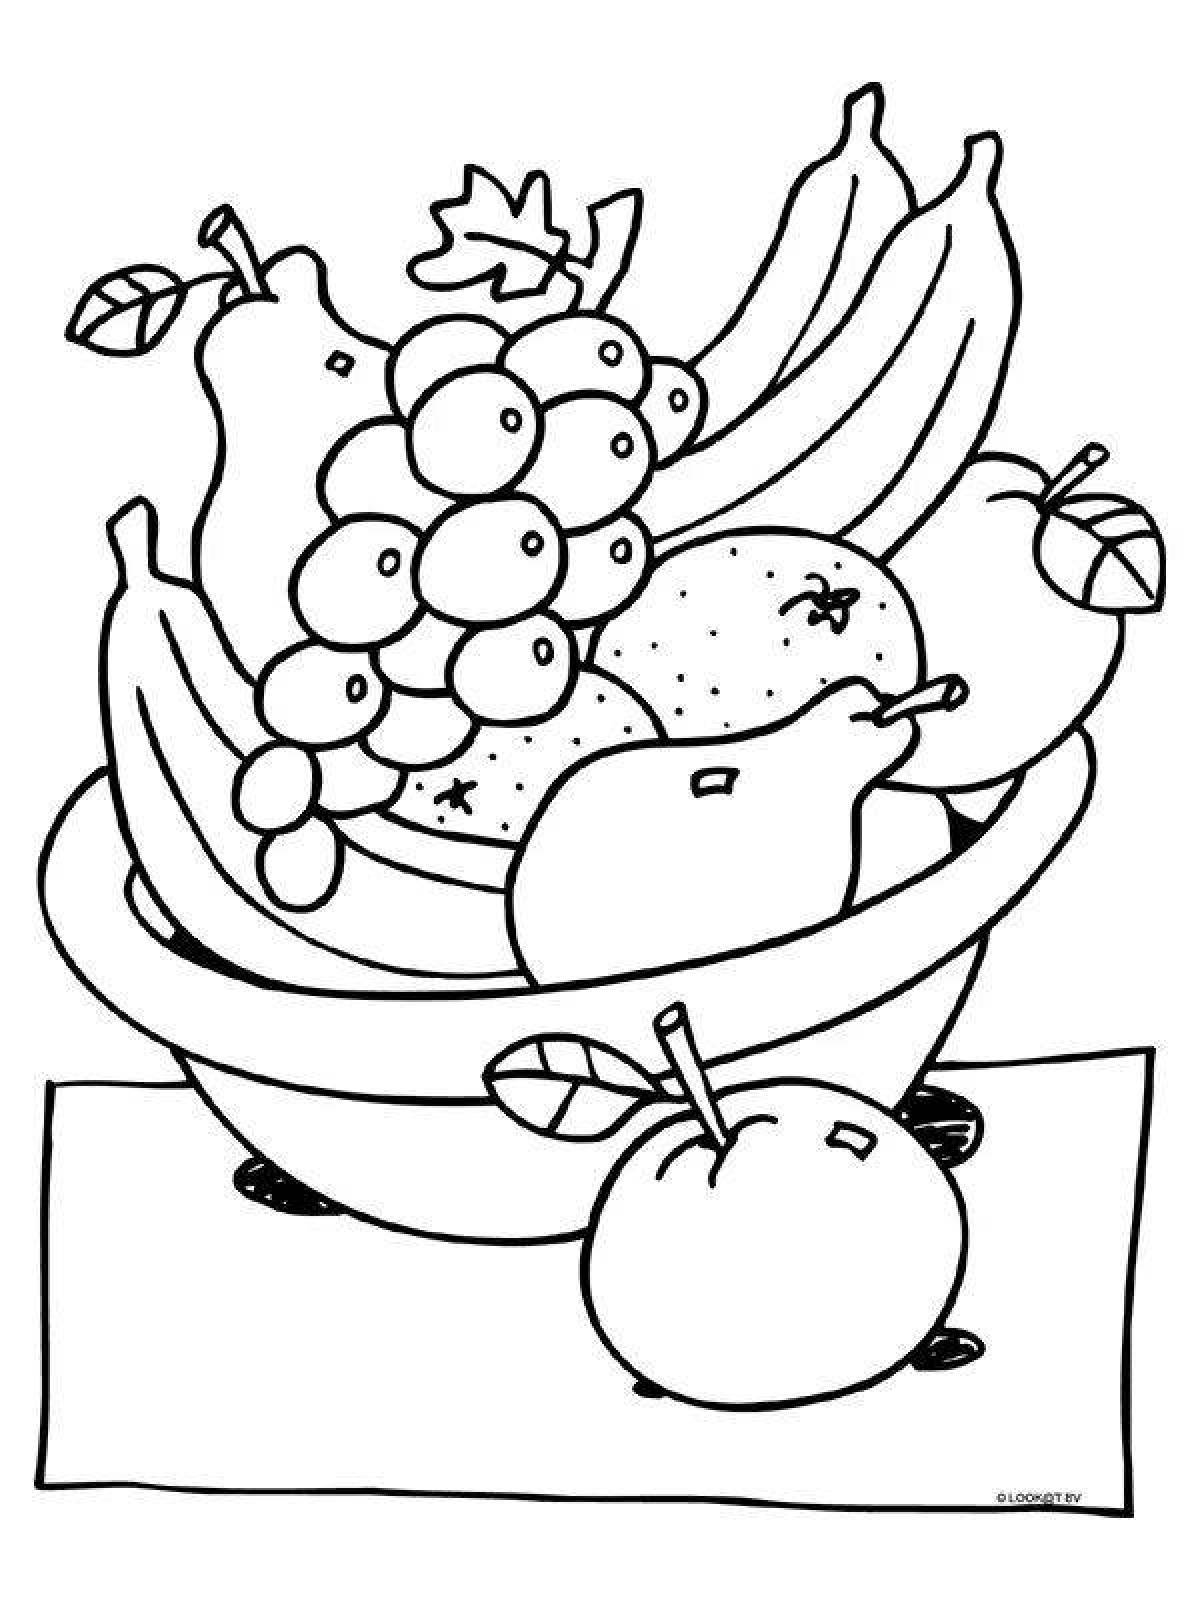 Colorful fruit plate coloring book